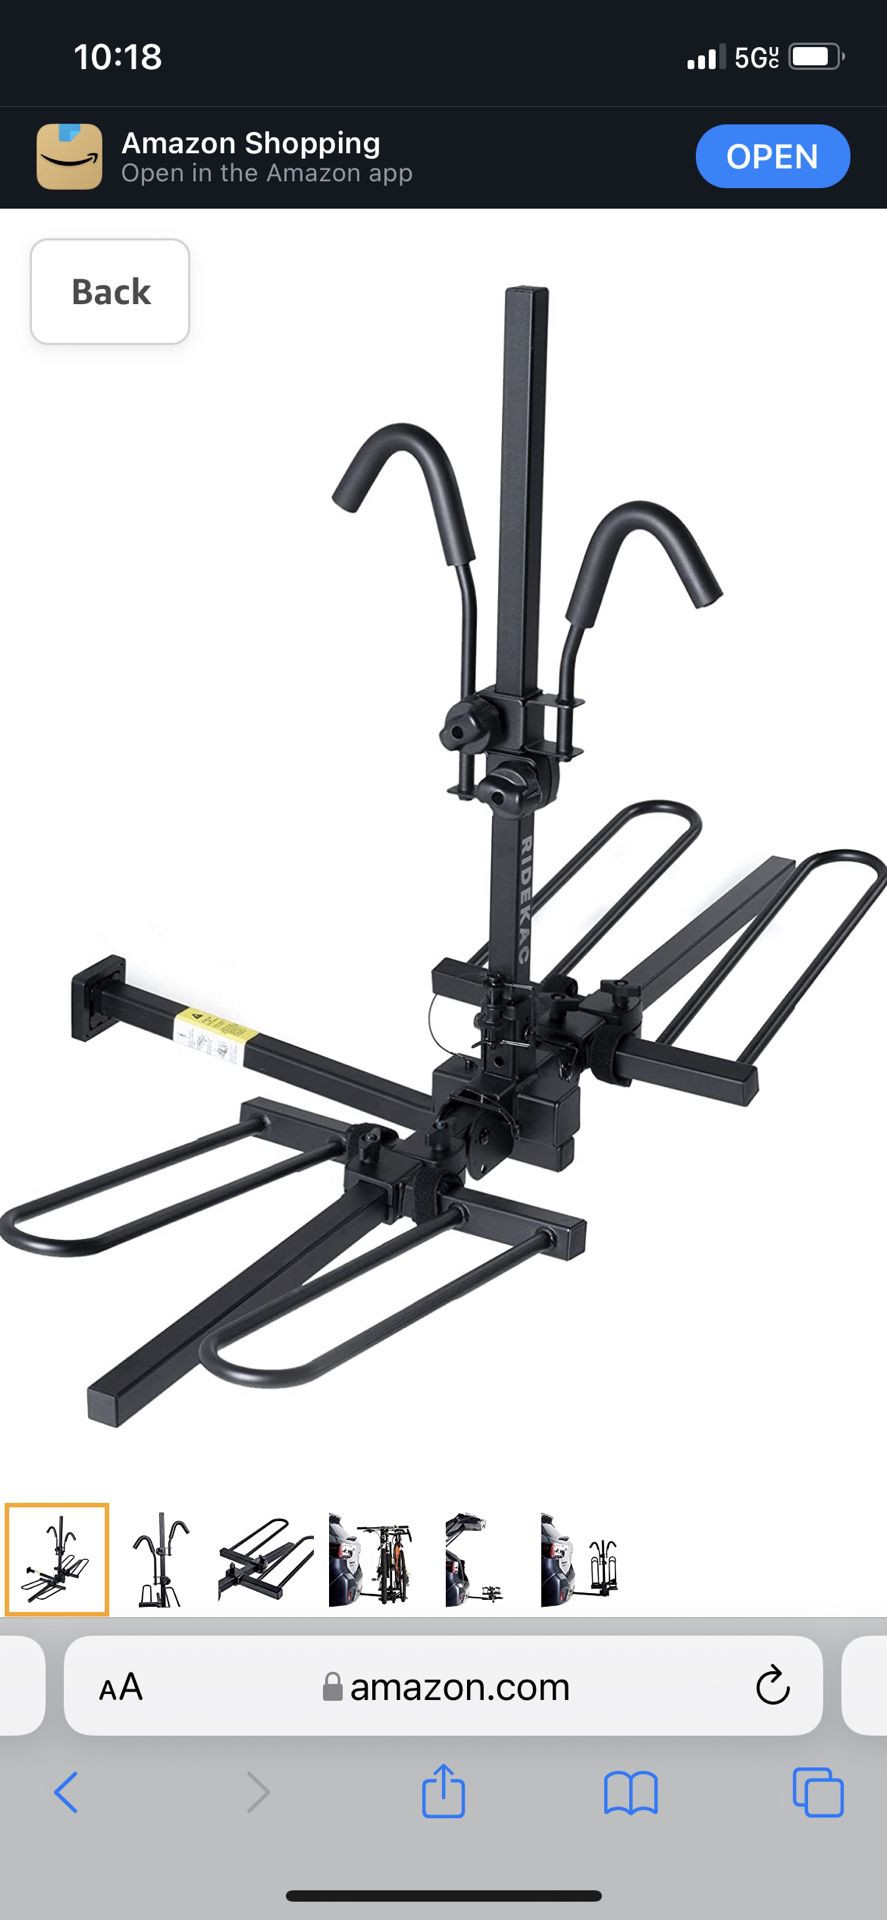 KAC E2 1.25" & 2" Hitch Mounted Rack 2-Bike Platform Style Carrier for Standard and Fat Tire Bicycles - 2 Bikes X 30 lbs (60 lbs Total) Heavy Weight C